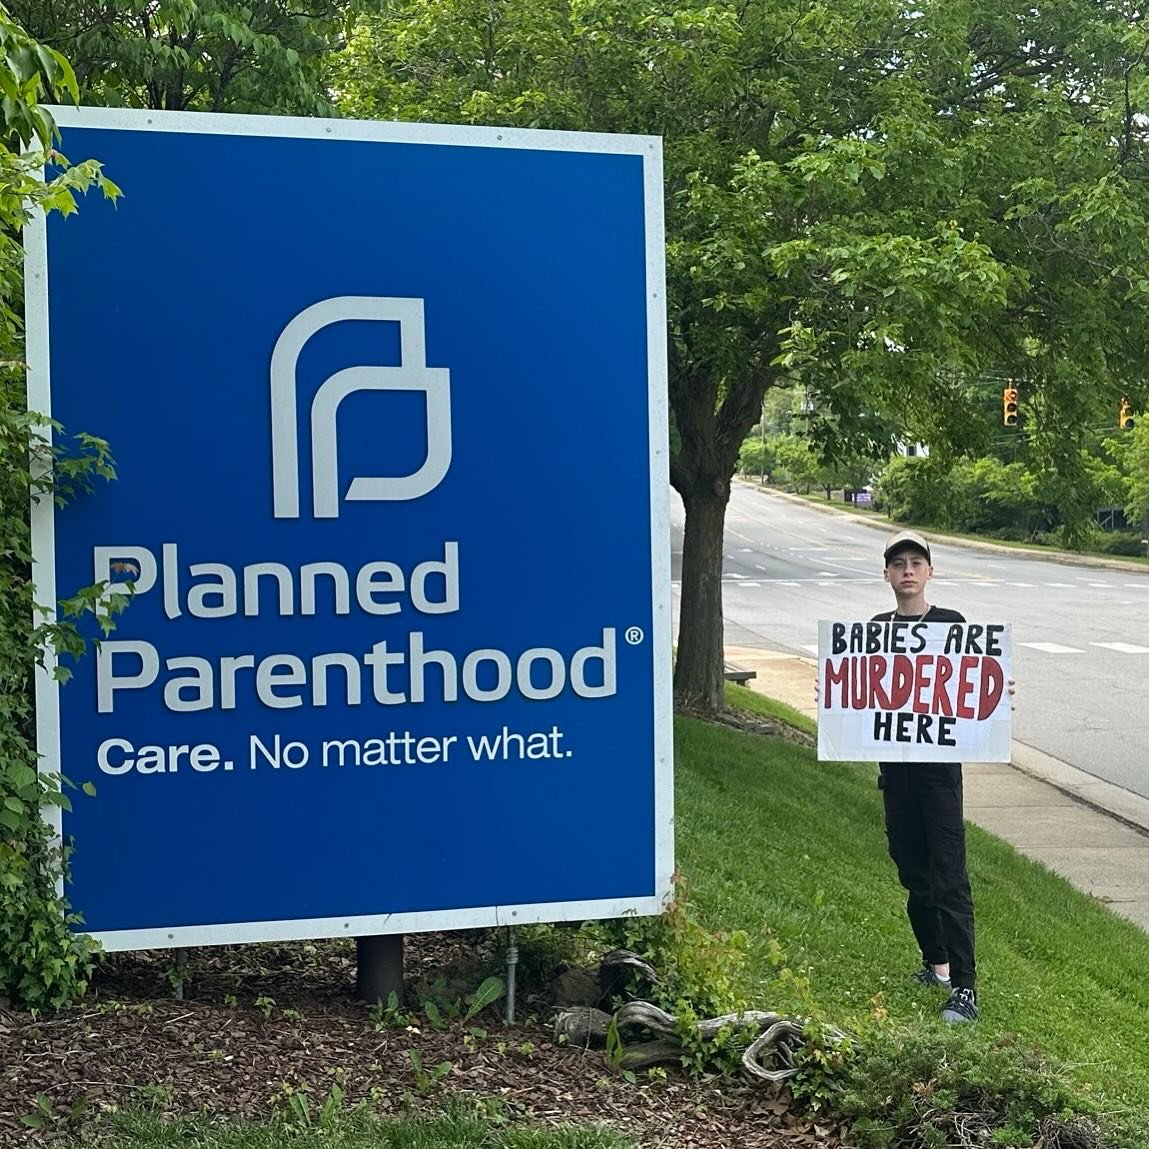 I was one proud father when I learned this is what my boy was up to today. This photo is dedicated to my brother&rsquo;s neighbor who put a &ldquo;Planned Parenthood&rdquo; sign up by the highway near his mailbox just to spite him (too cowardly to ad